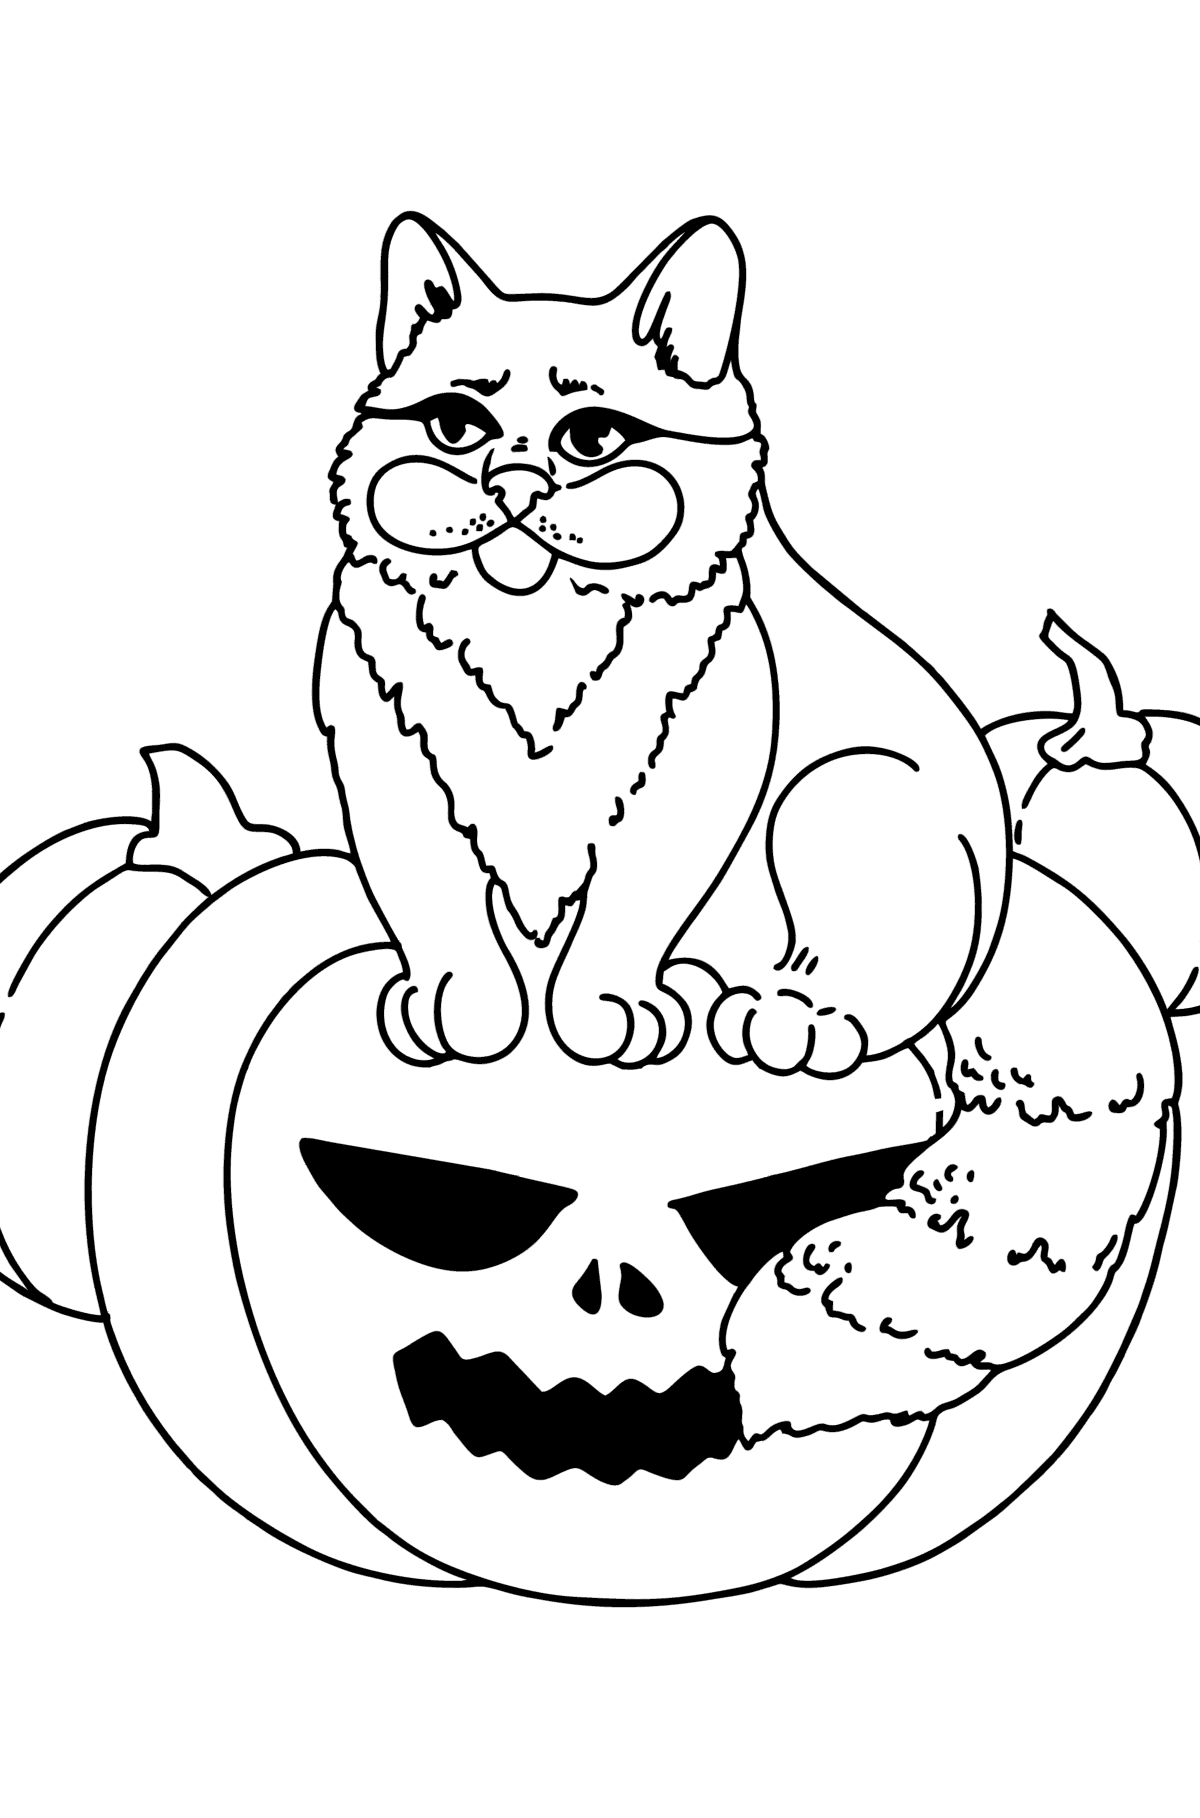 Halloween Cat coloring page - Coloring Pages for Kids